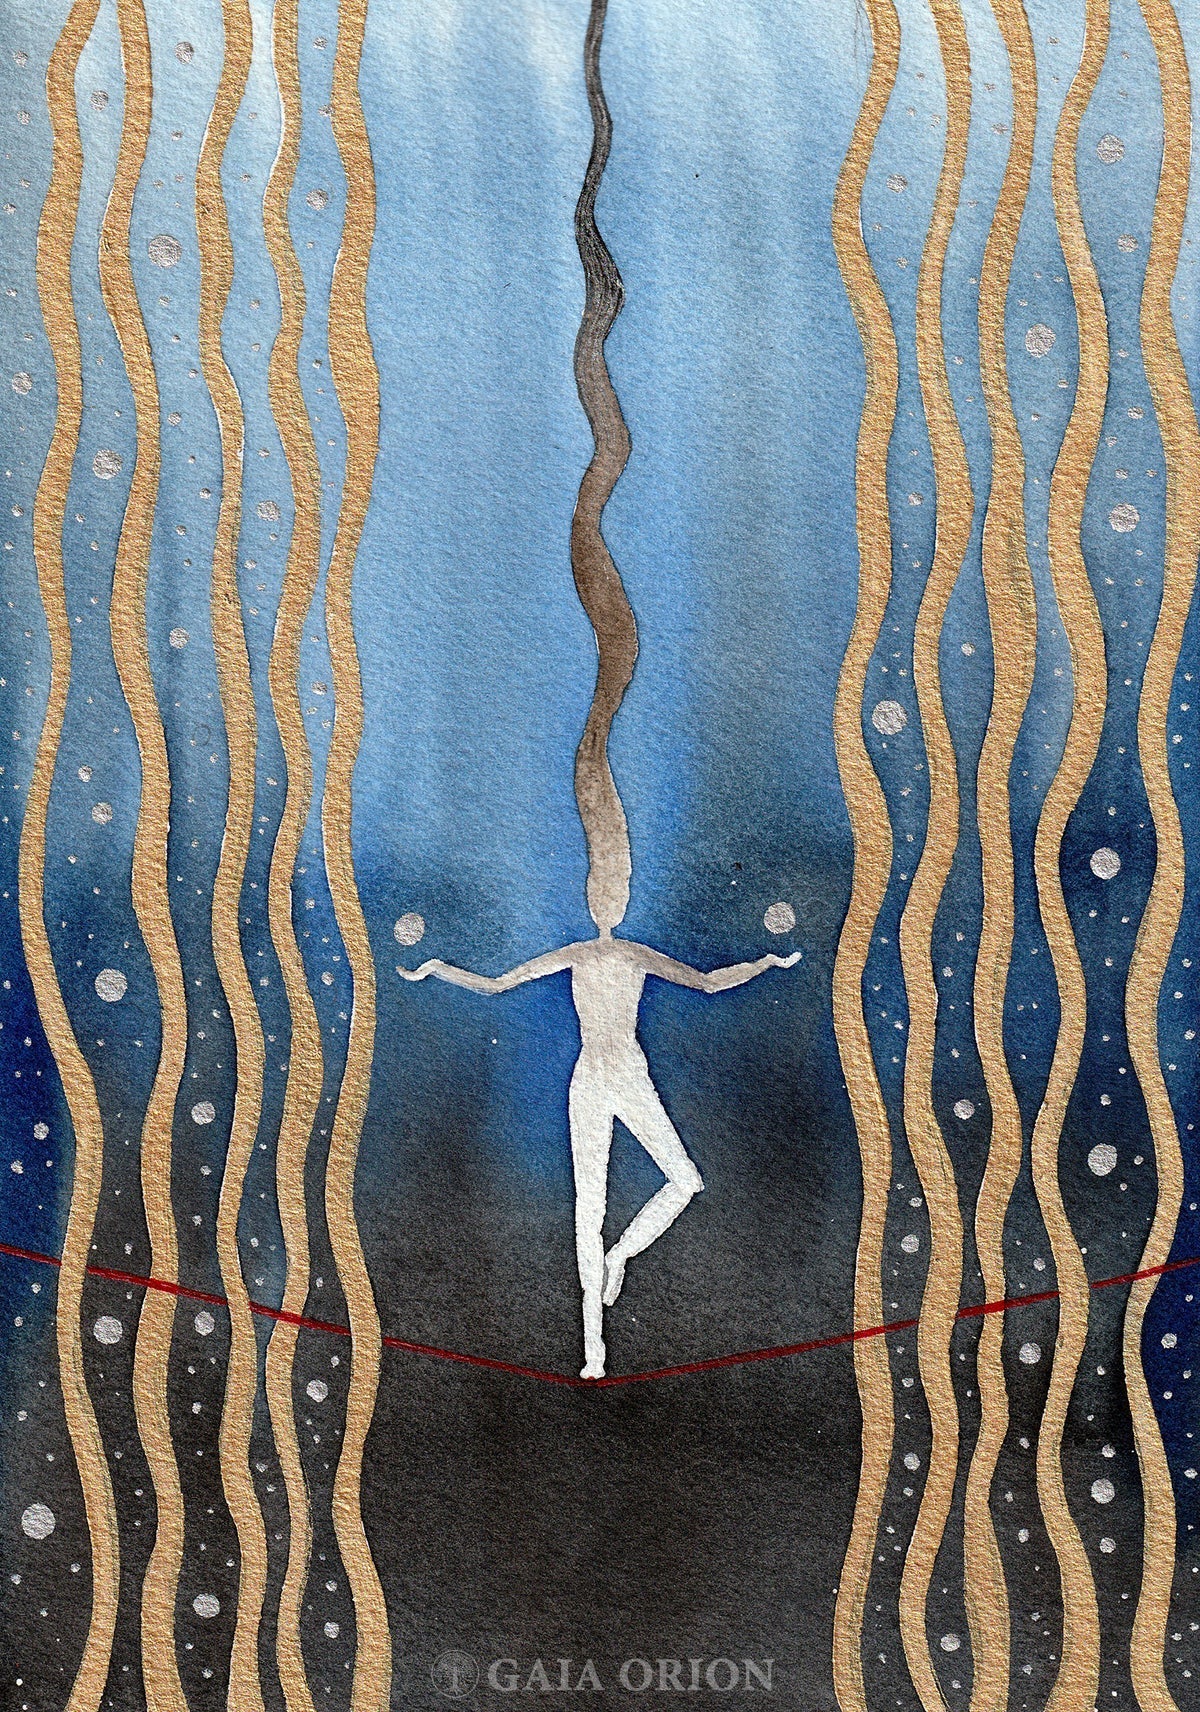 Life is a Balancing Act - Watercolour and Gold Acrylic 25 x 18 cm - Gaia Orion Art